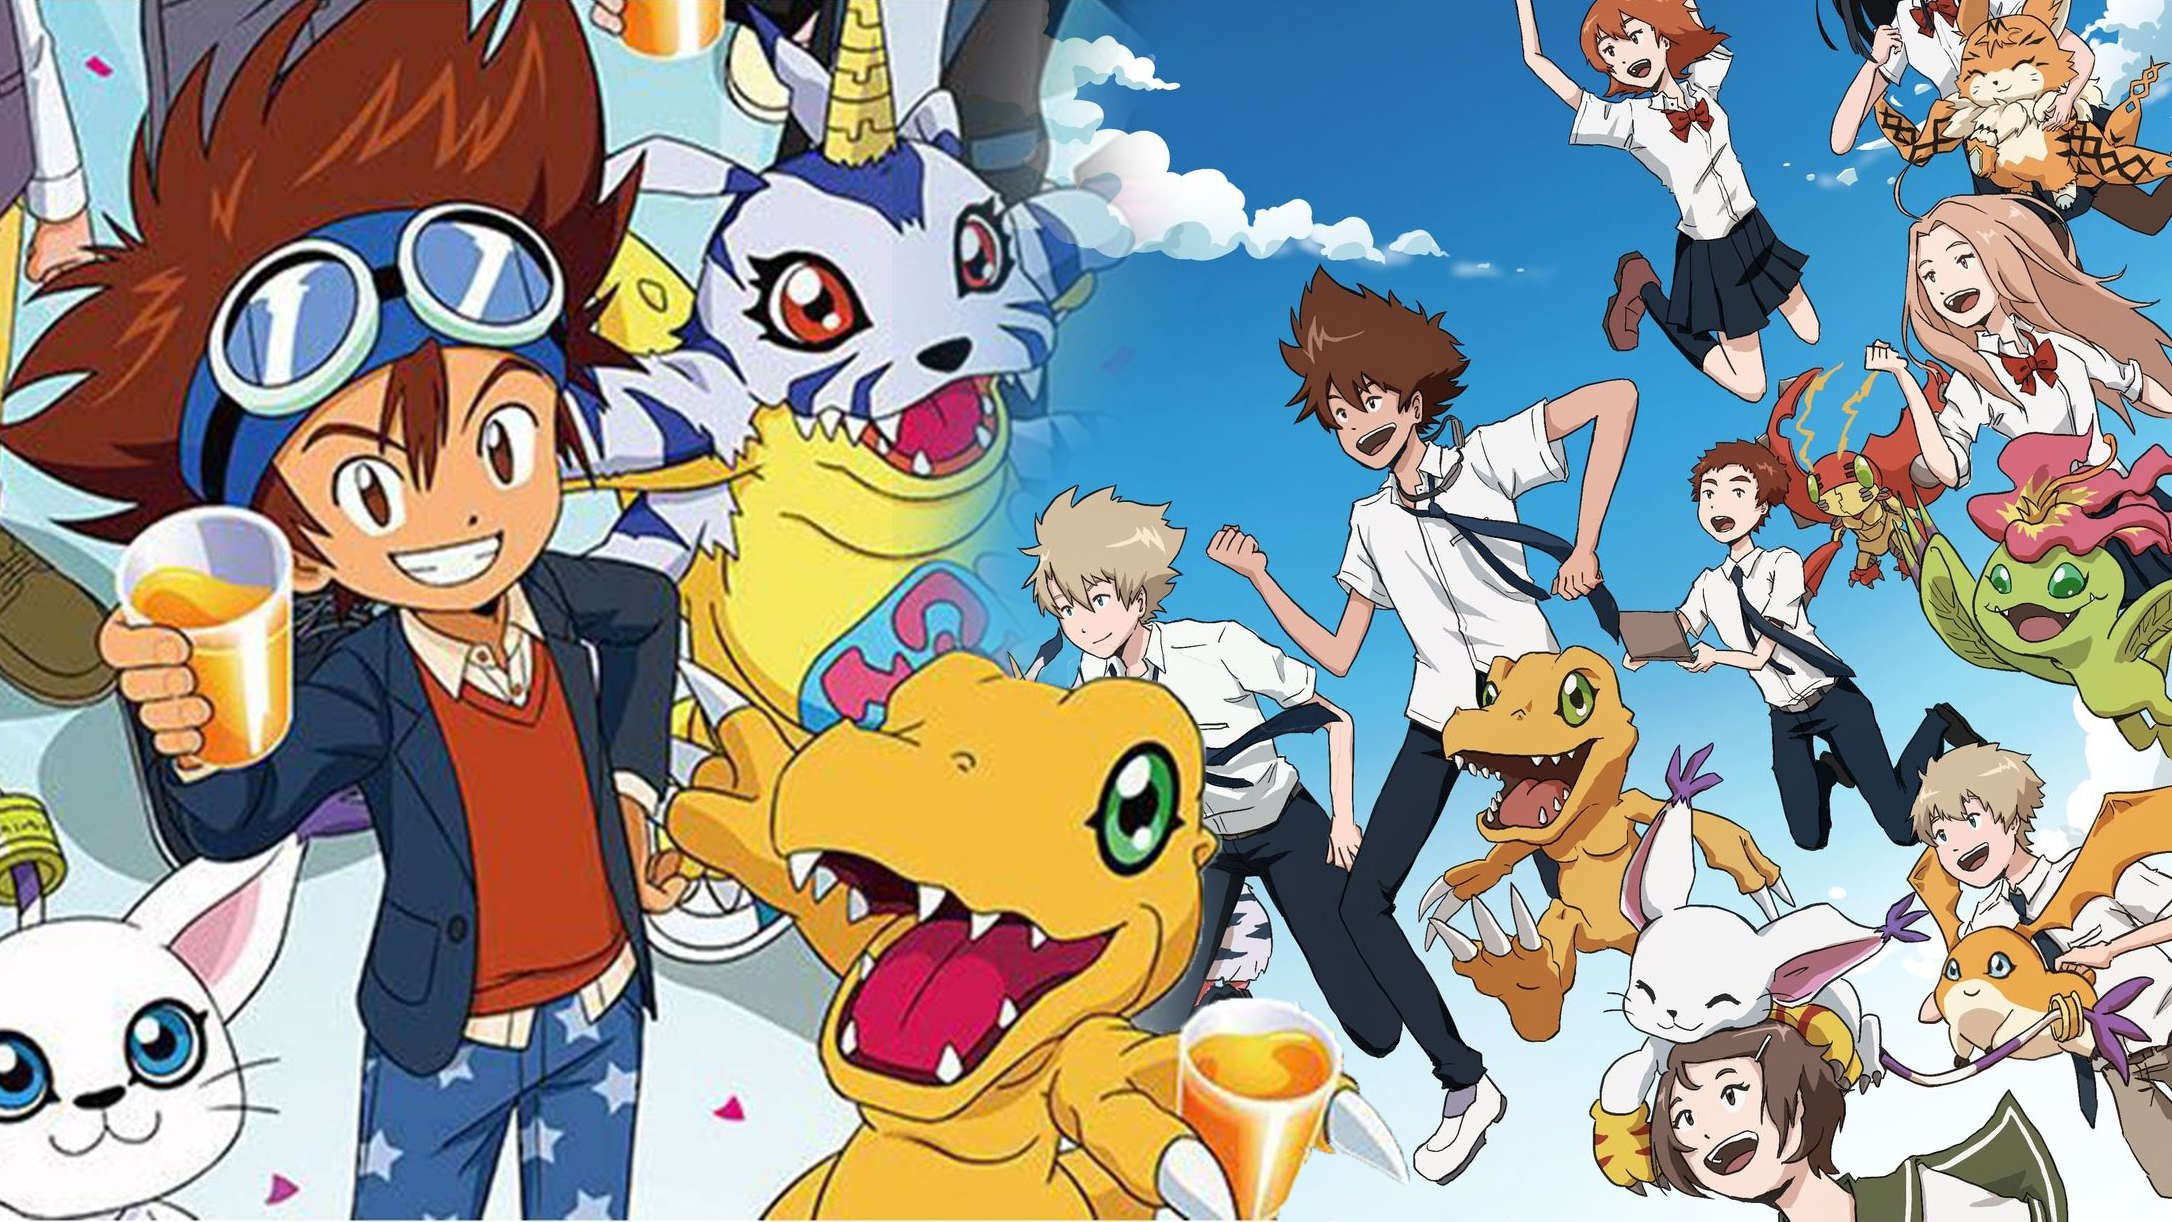 As Digimon evolved, so did we